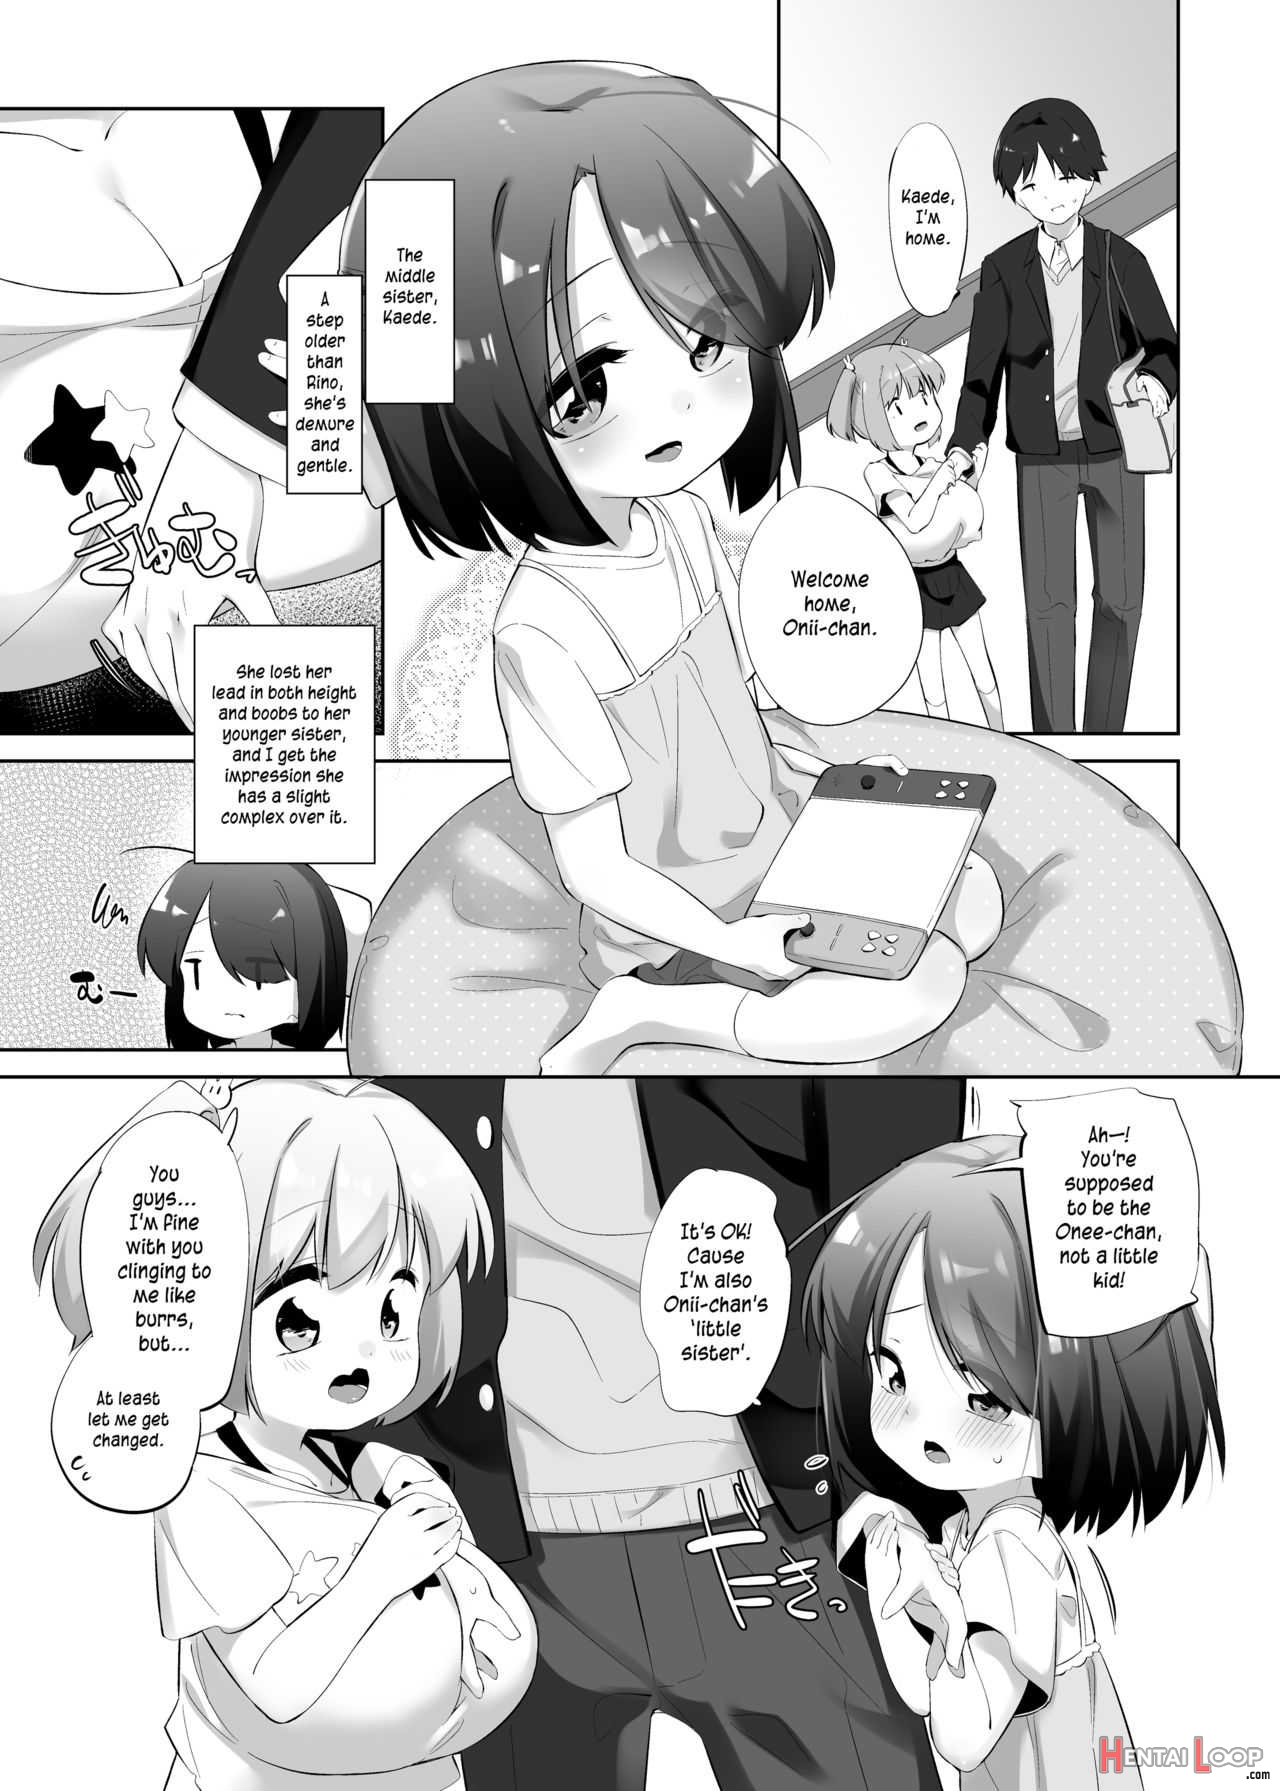 Between Sisters, Are You Happy? page 5